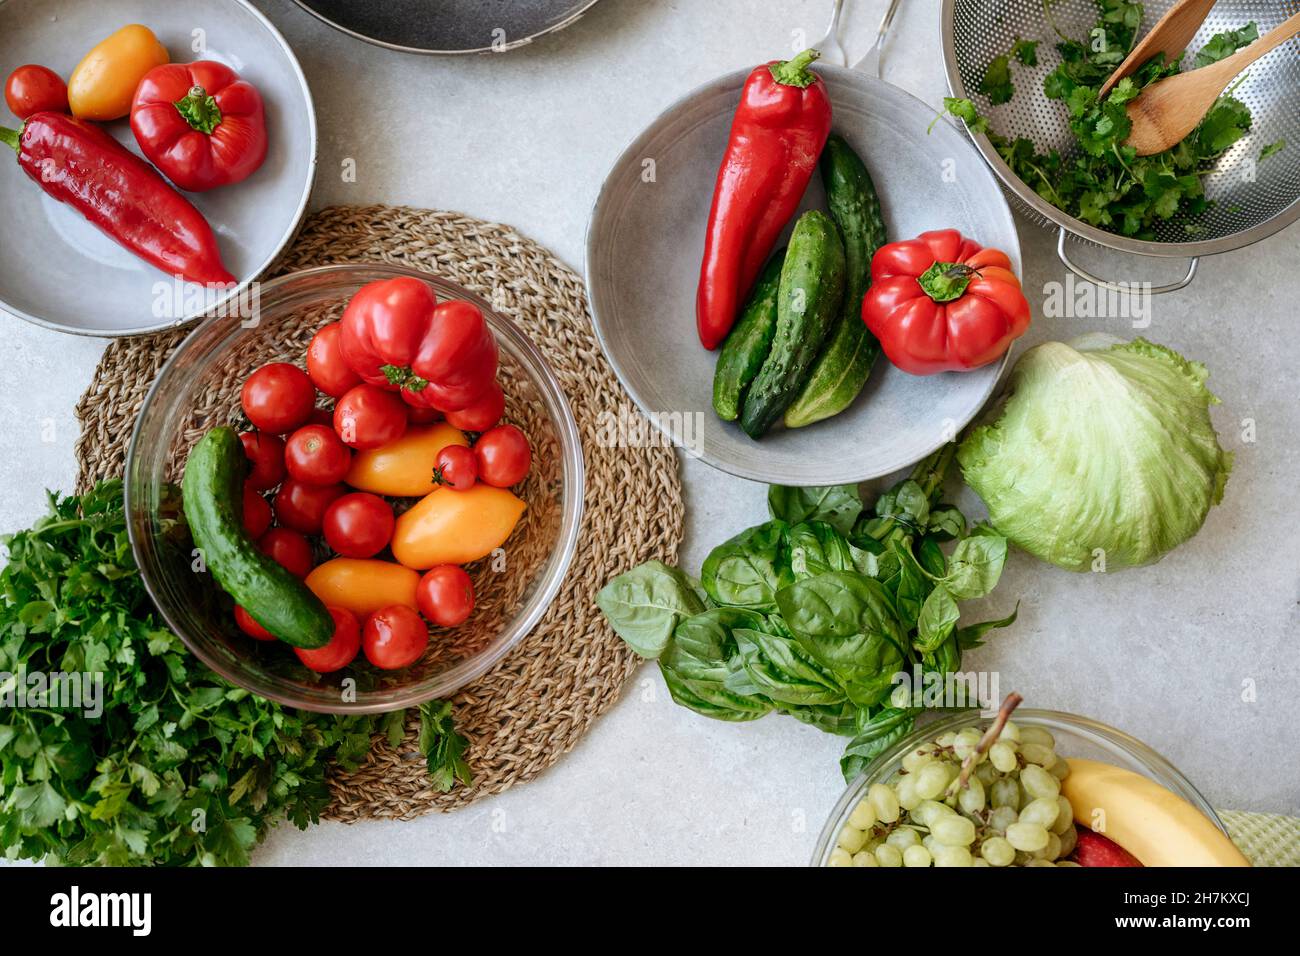 Fruits and vegetables on kitchen island Stock Photo